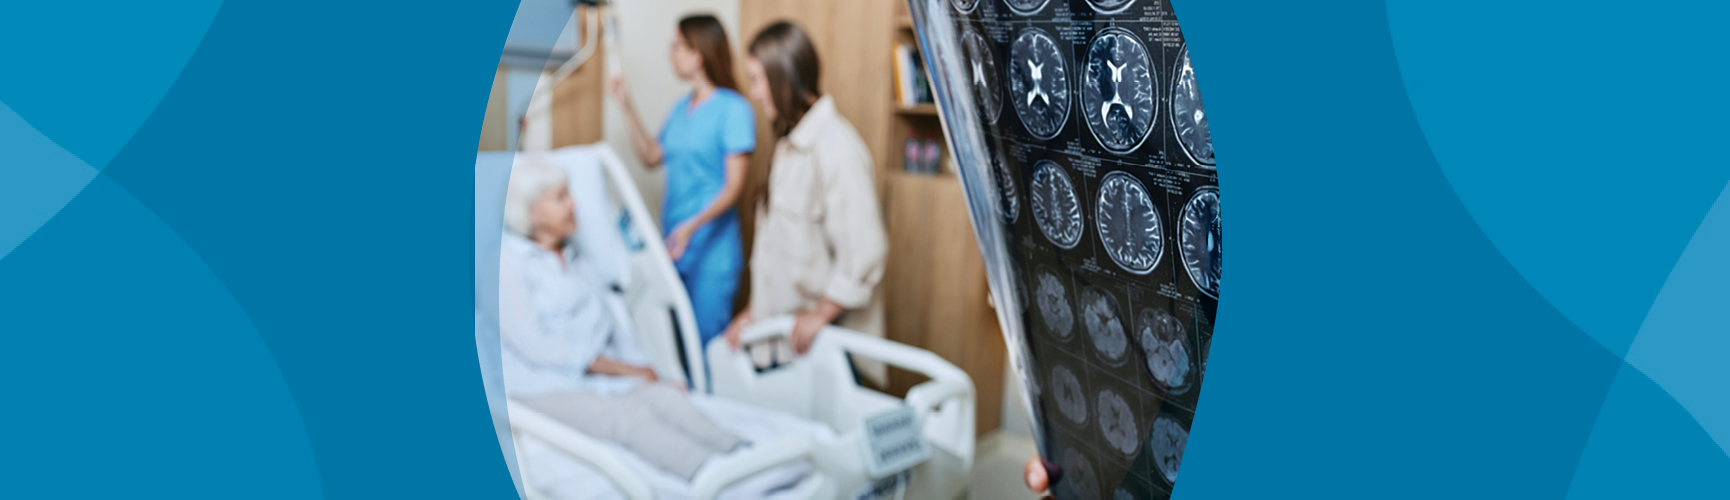 A doctor looks at a brain scan. In the foreground, a patient is surrounded by a family member and a nurse.